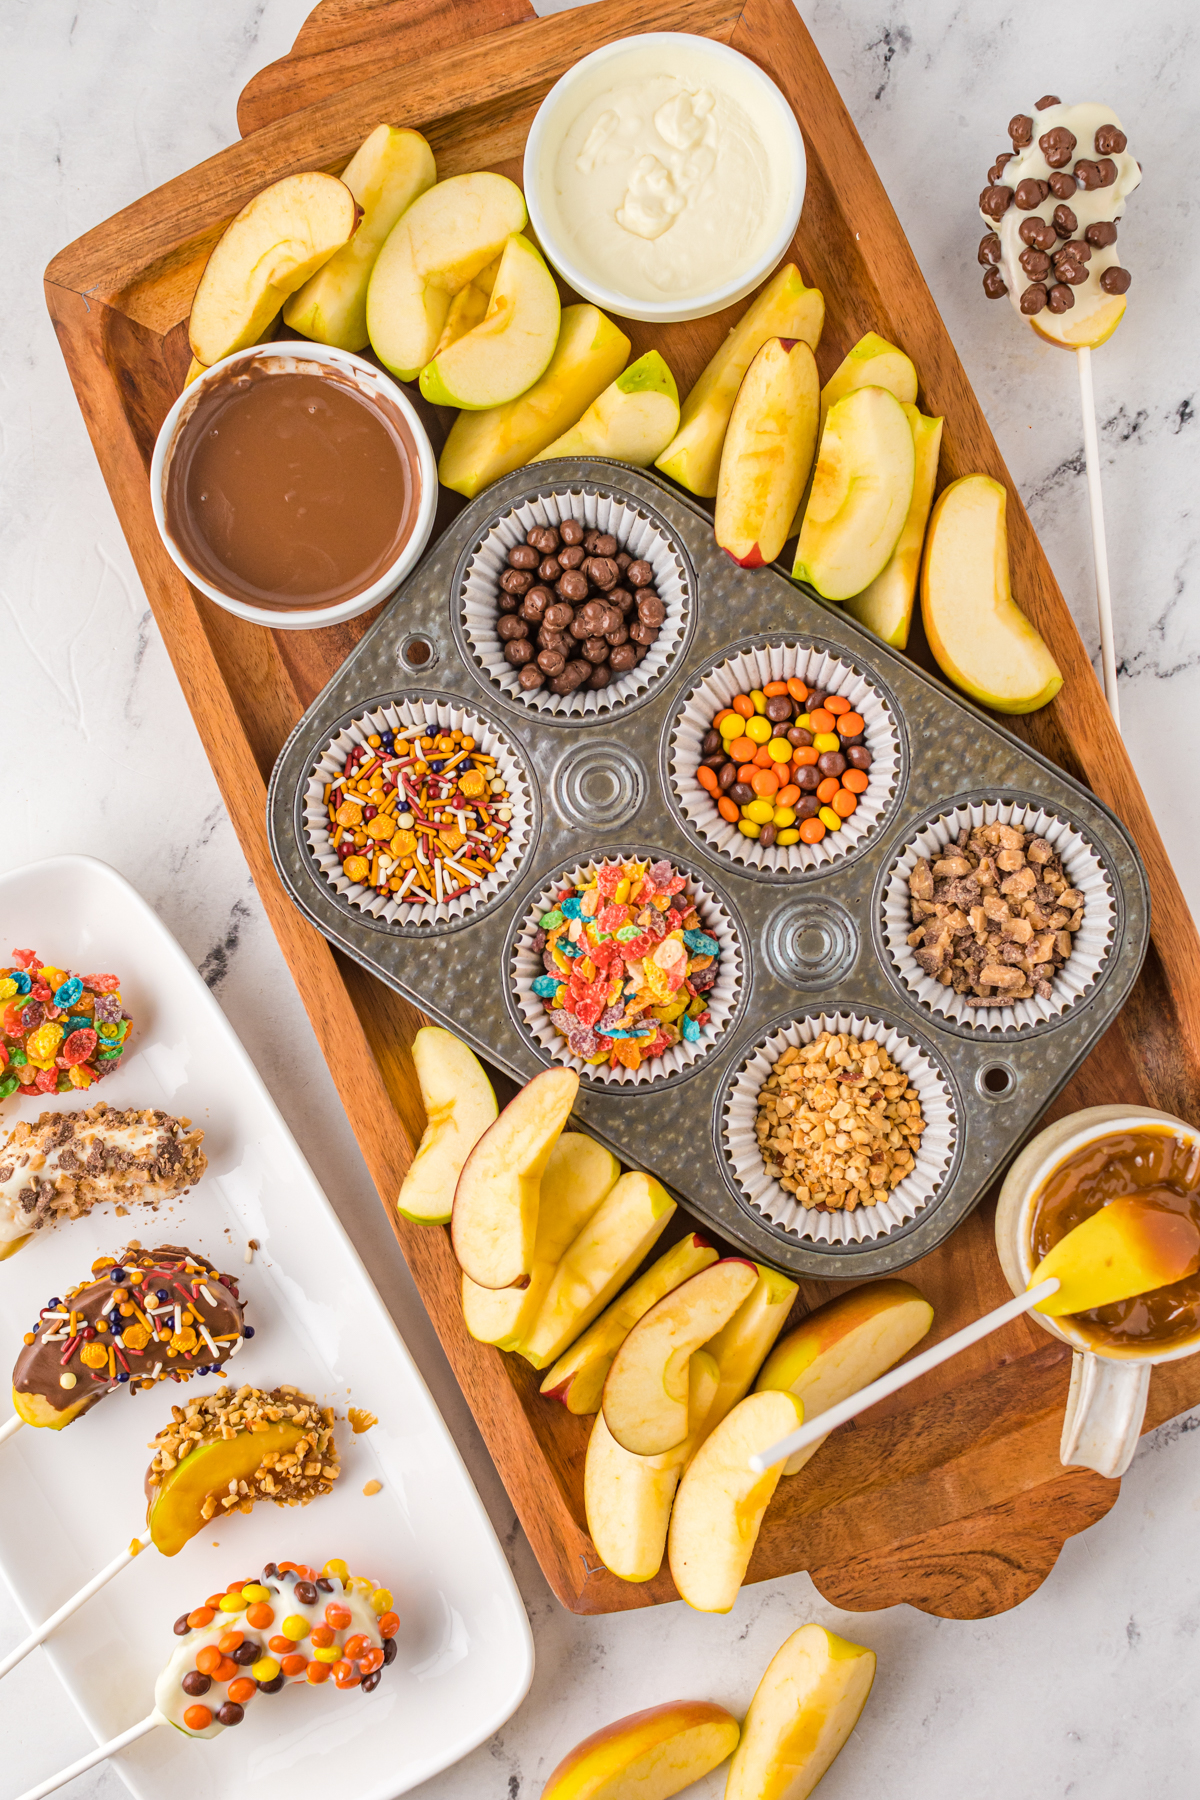 The Best Caramel Apple Board and Topping Ideas - 16